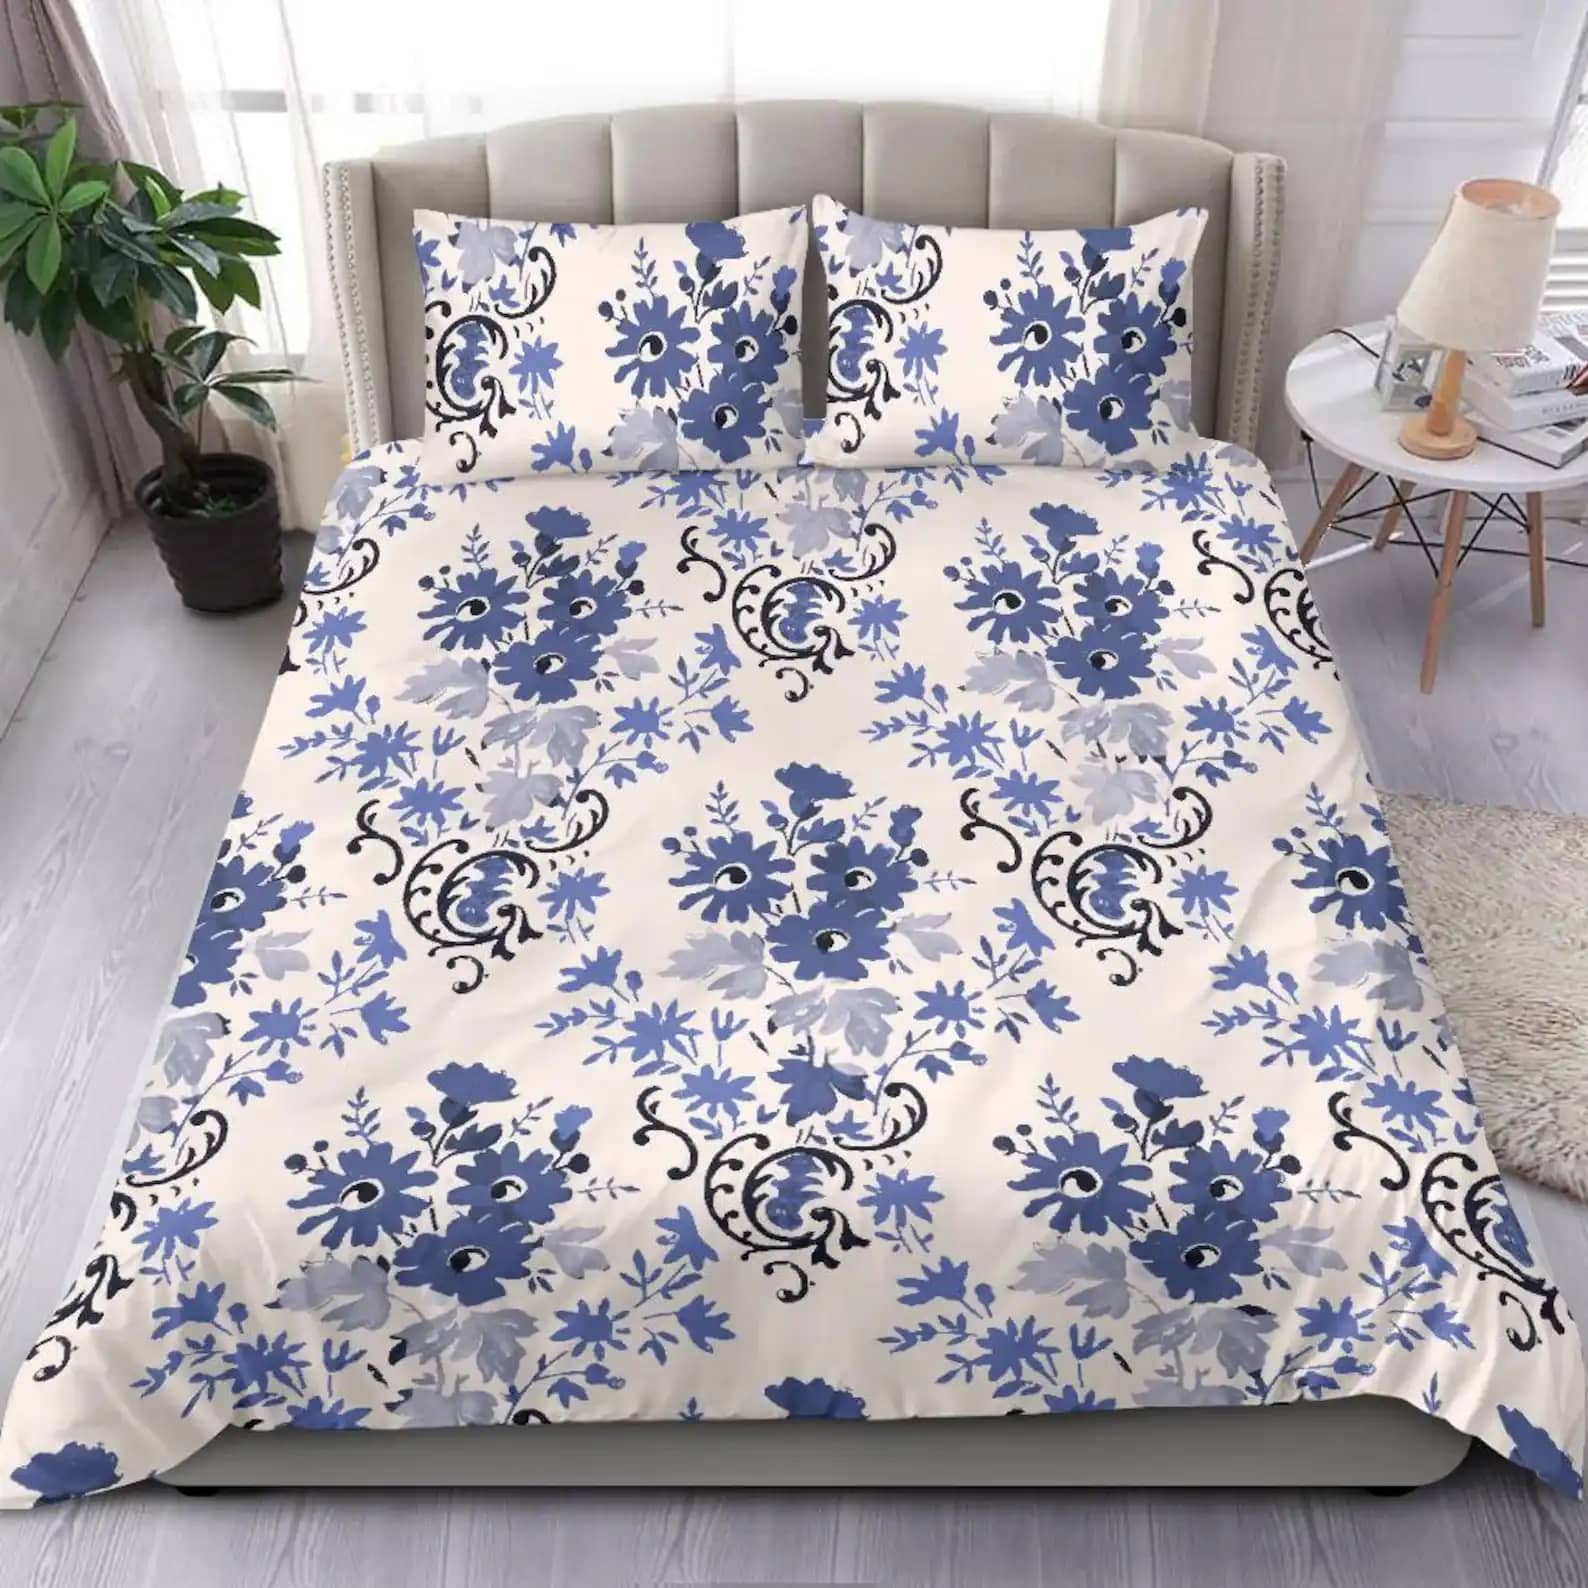 Blue Vintage Victorian Floral Wallpaper Pattern On White Background For A Lovely Sleep Quilt Bedding Sets